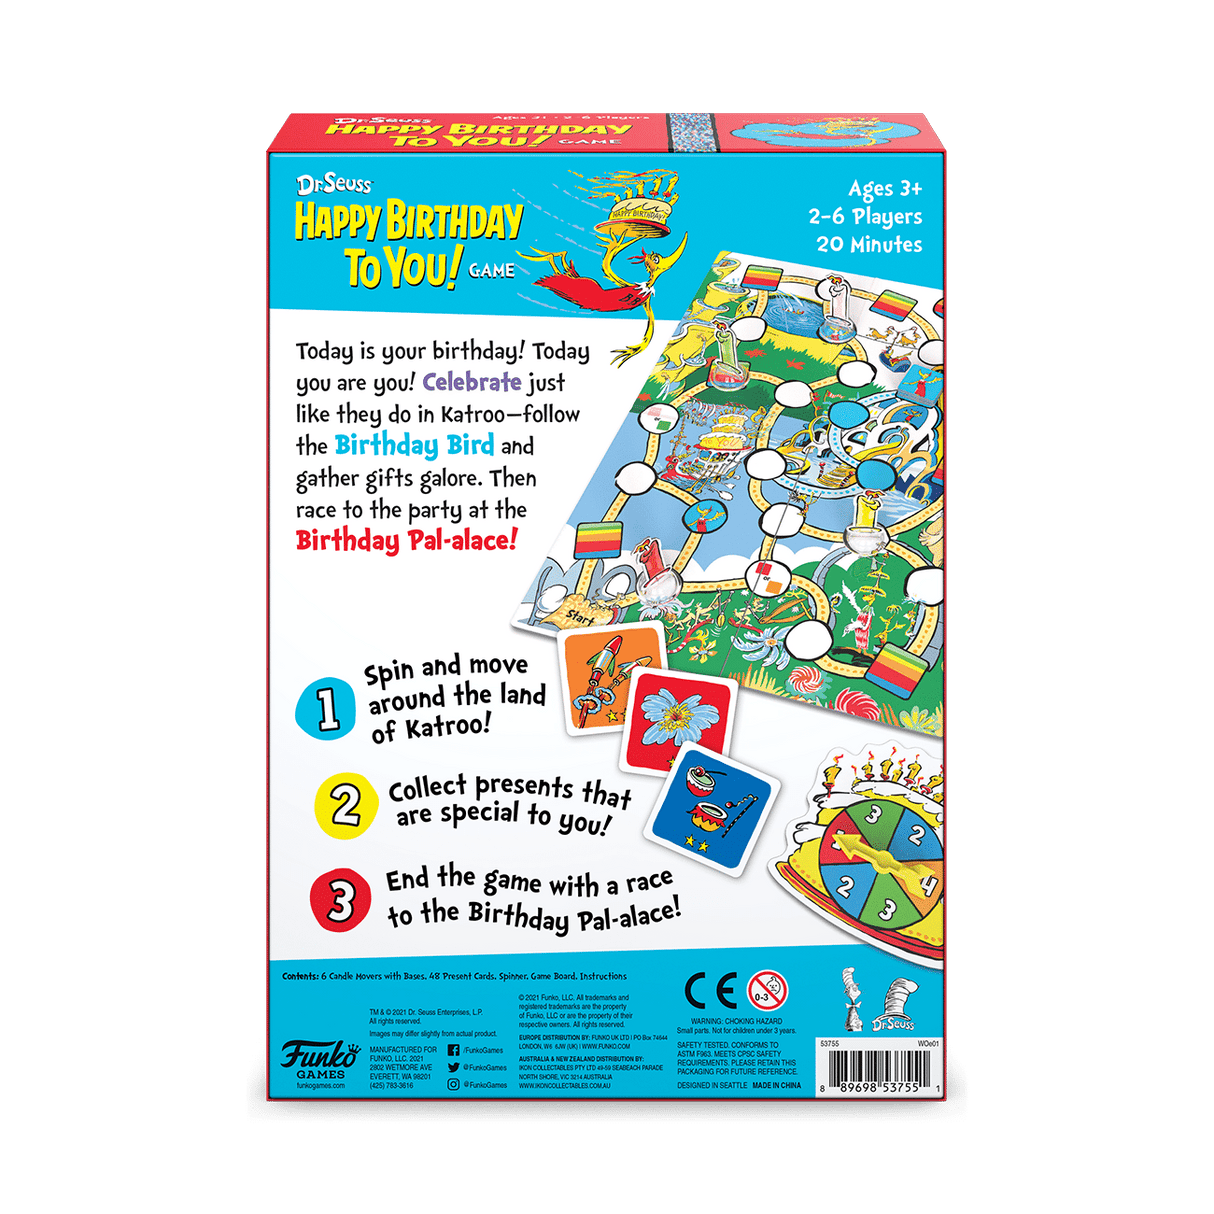 Funko Signature Games - Dr. Seuss Happy Birthday To You Card Game (6969749307492)